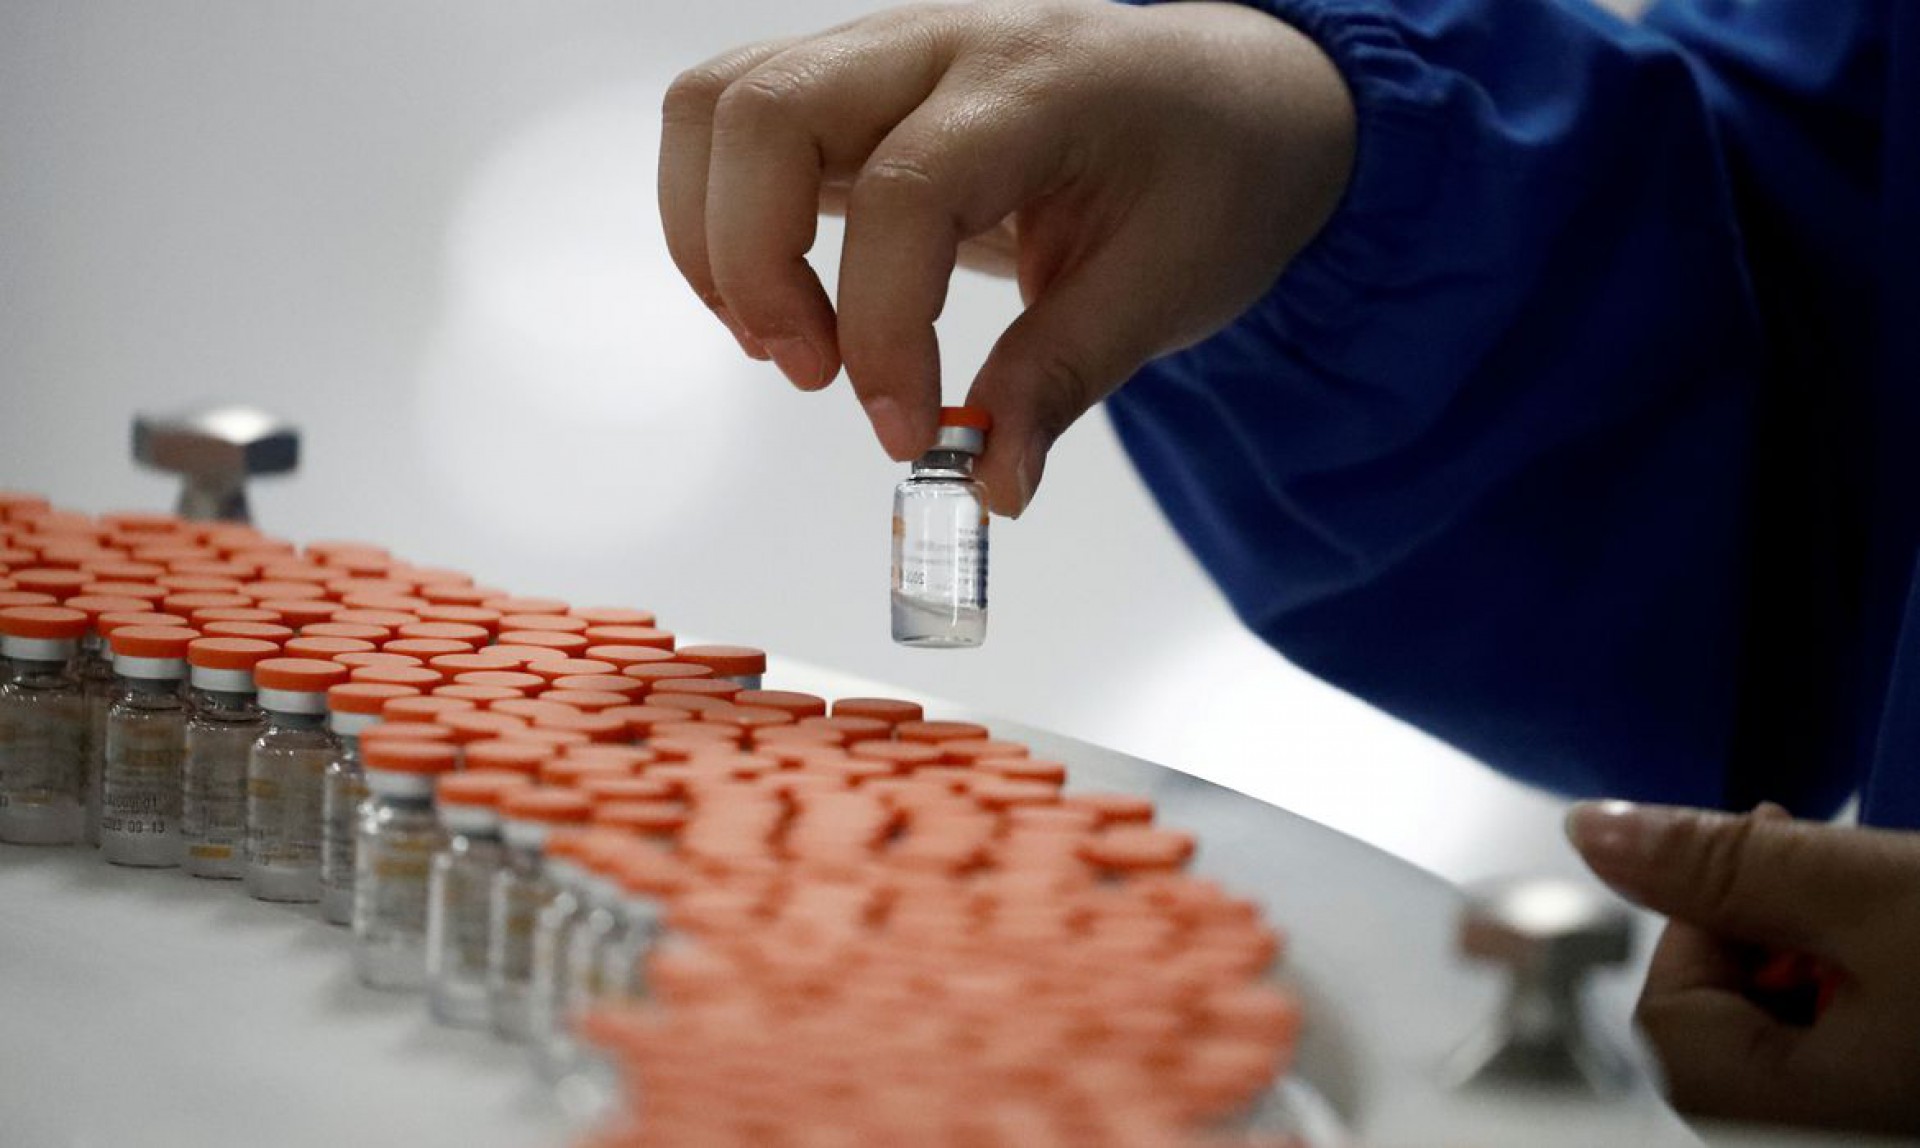 FILE PHOTO: A worker performs a quality check in the packaging facility of Chinese vaccine maker Sinovac Biotech, developing an experimental coronavirus disease (COVID-19) vaccine, during a government-organized media tour in Beijing, China, September 24, 2020. REUTERS/Thomas Peter/File Photo (Foto: REUTERS/Thomas Peter/File Photo)